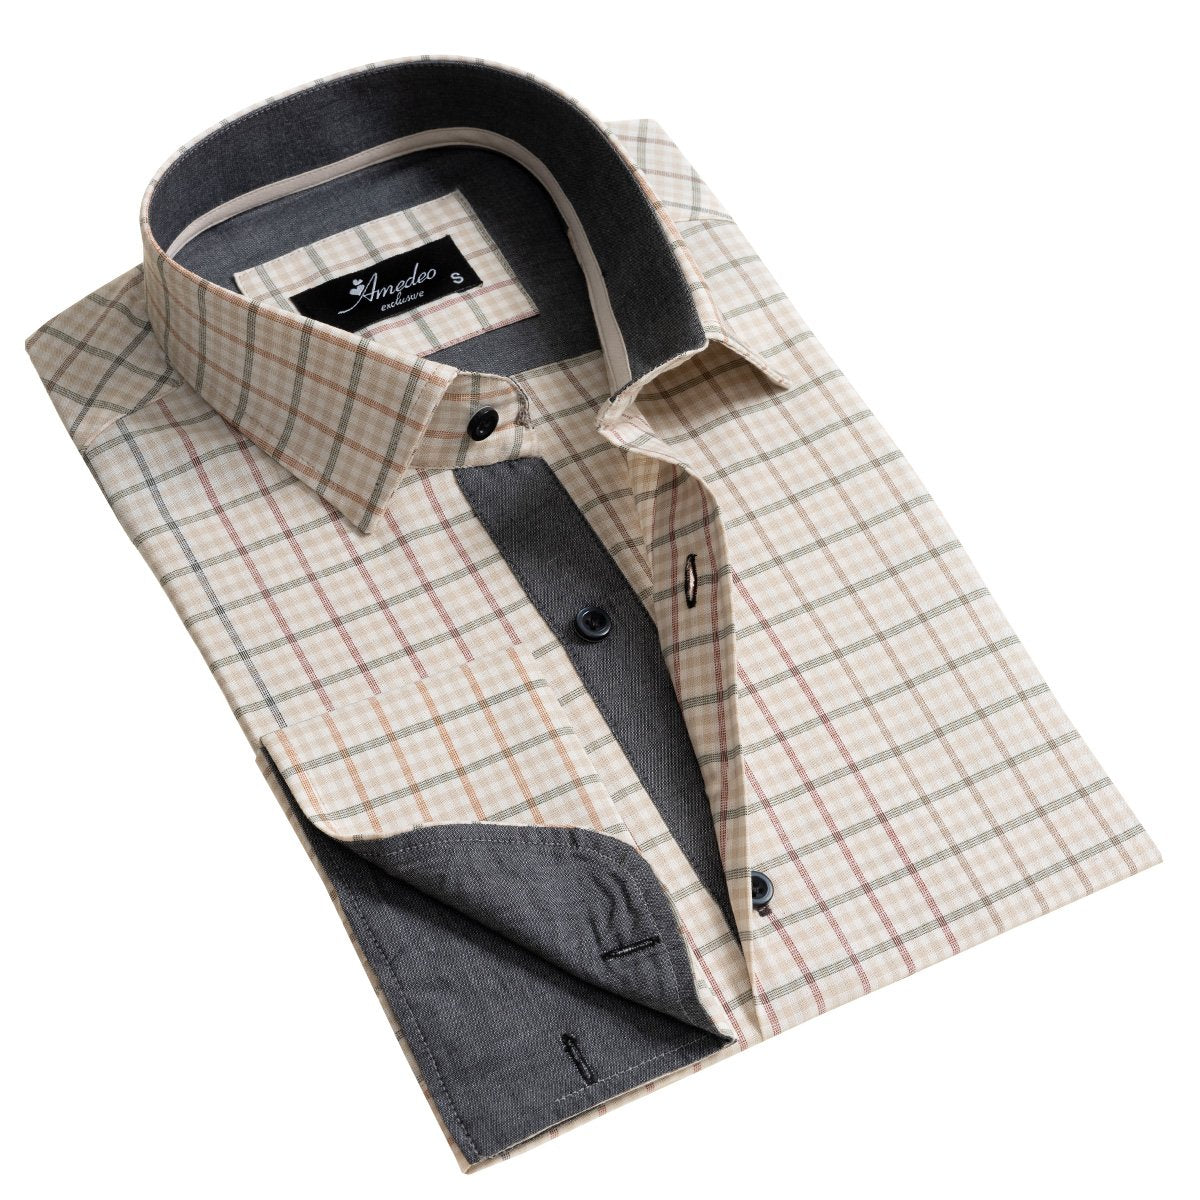 Tan Checked Men's Slim Fit French Cuff Dress Shirts with Cufflink Holes - Casual and Formal - Amedeo Exclusive